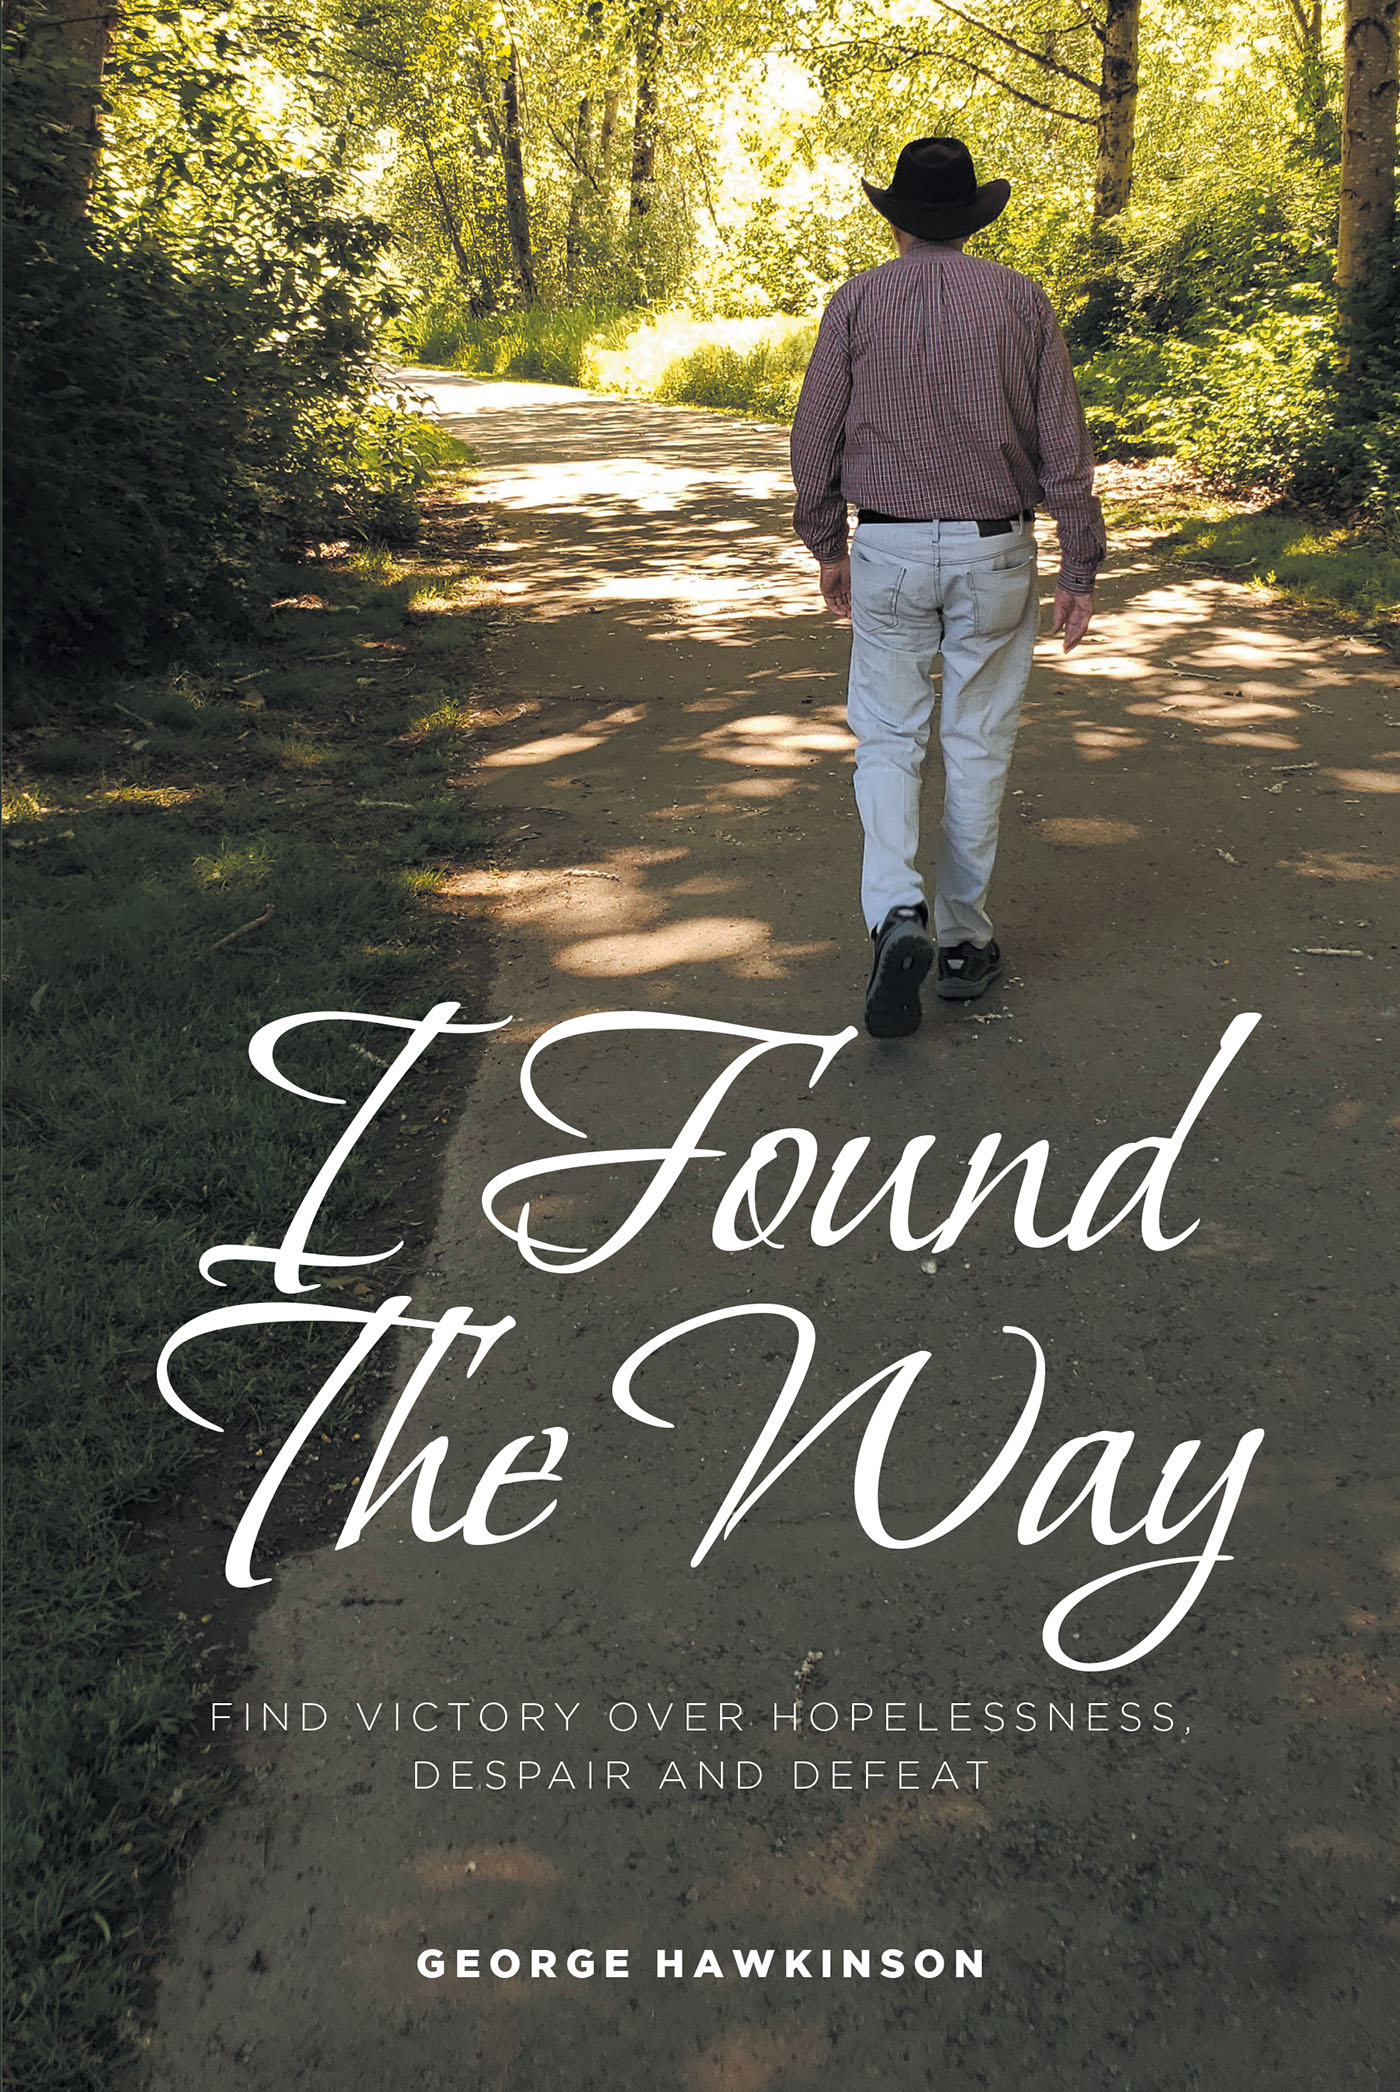 Author George Hawkinson’s New Book, "I Found The Way: Find Victory Over Hopelessness, Despair, and Defeat" Guides Readers in Deepening Their Ever-Growing Faith